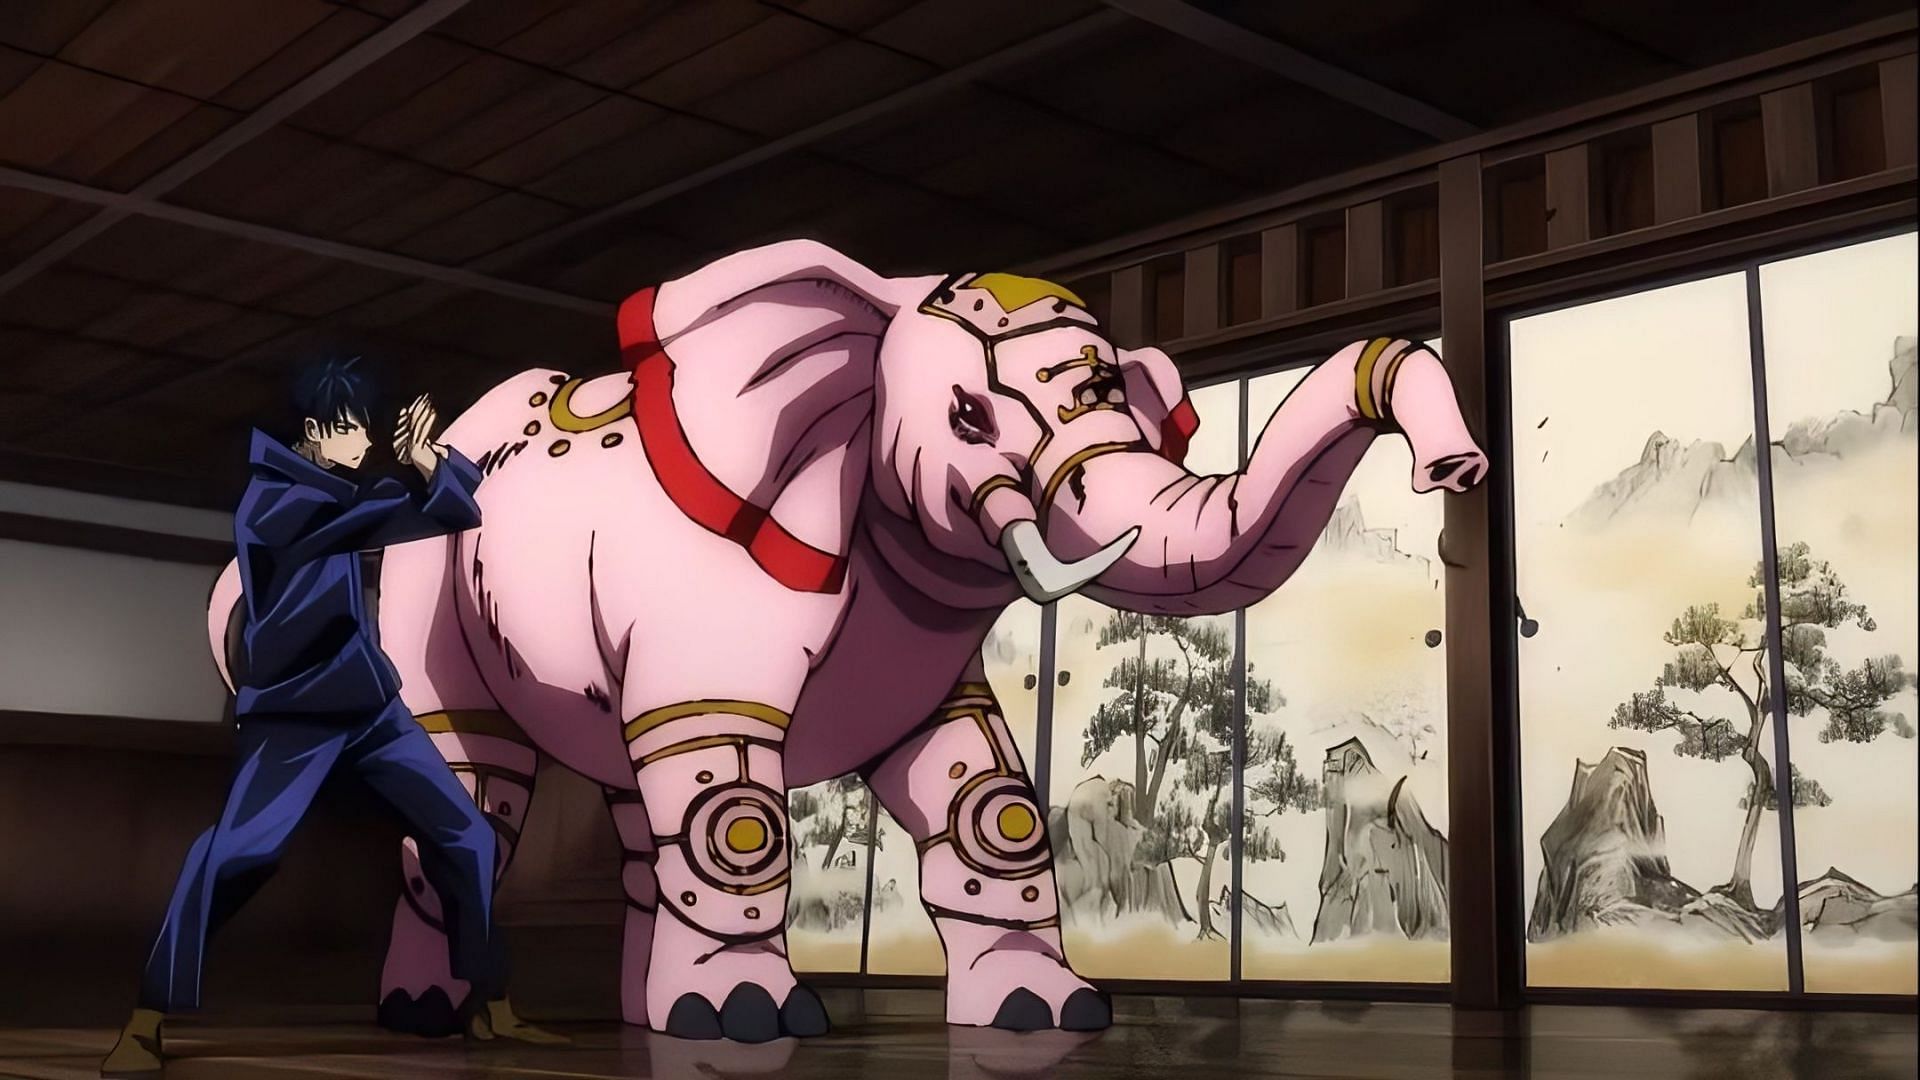 Max Elephant reappears in Jujutsu Kaisen chapter 218 (Image via Mappa)